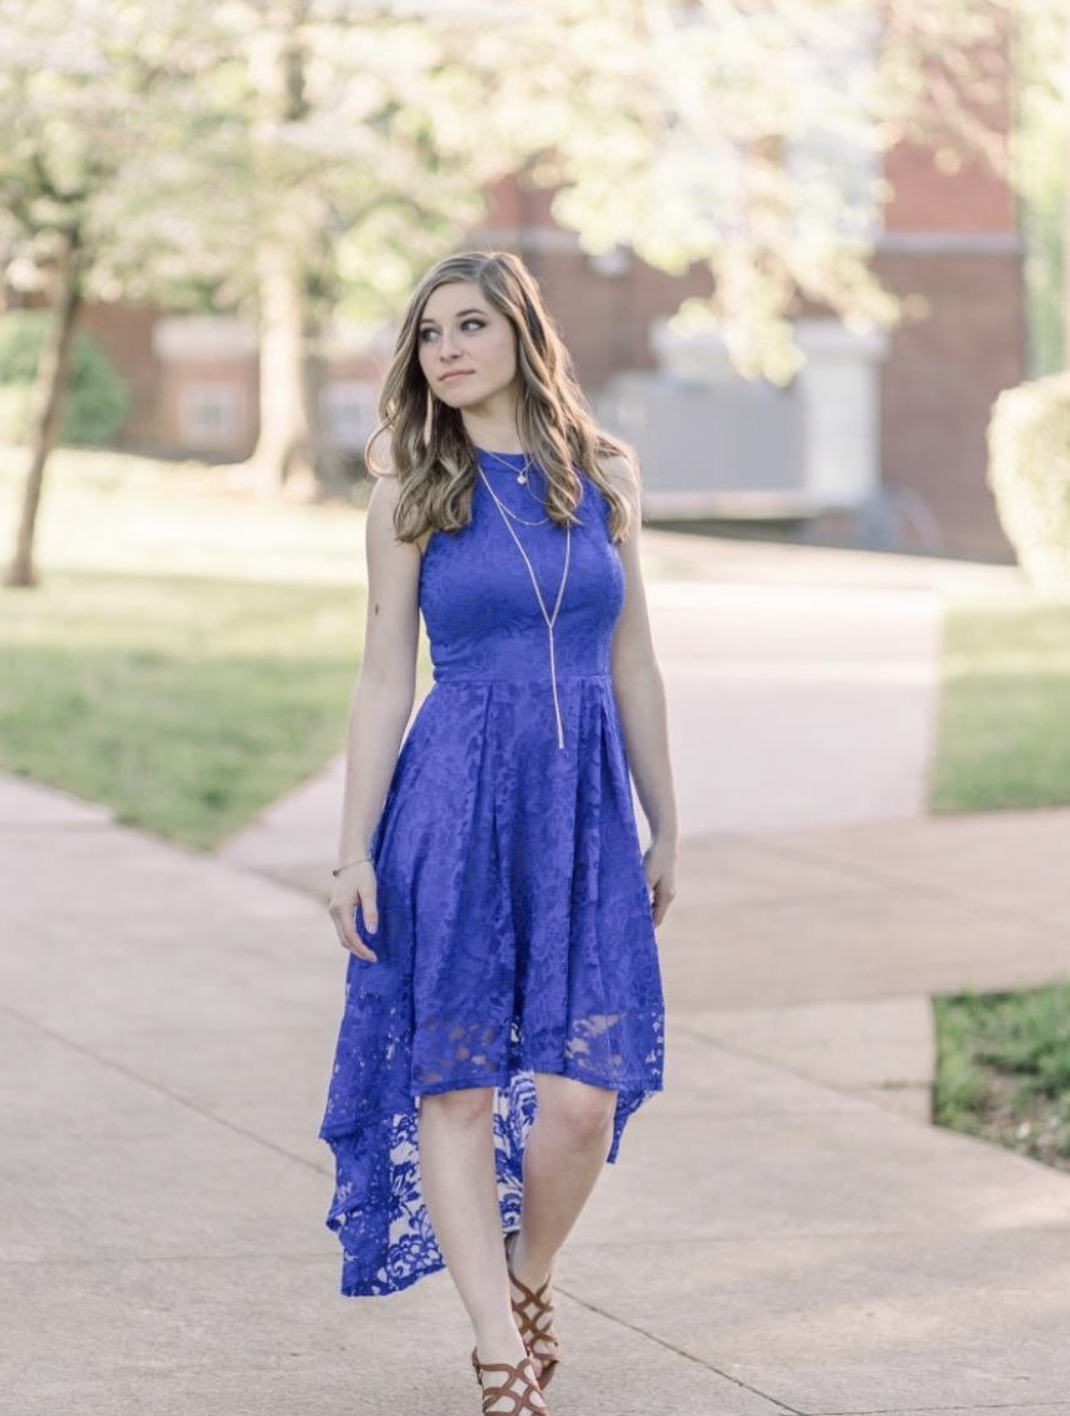 person walking on a sidewalk with the lace dress on